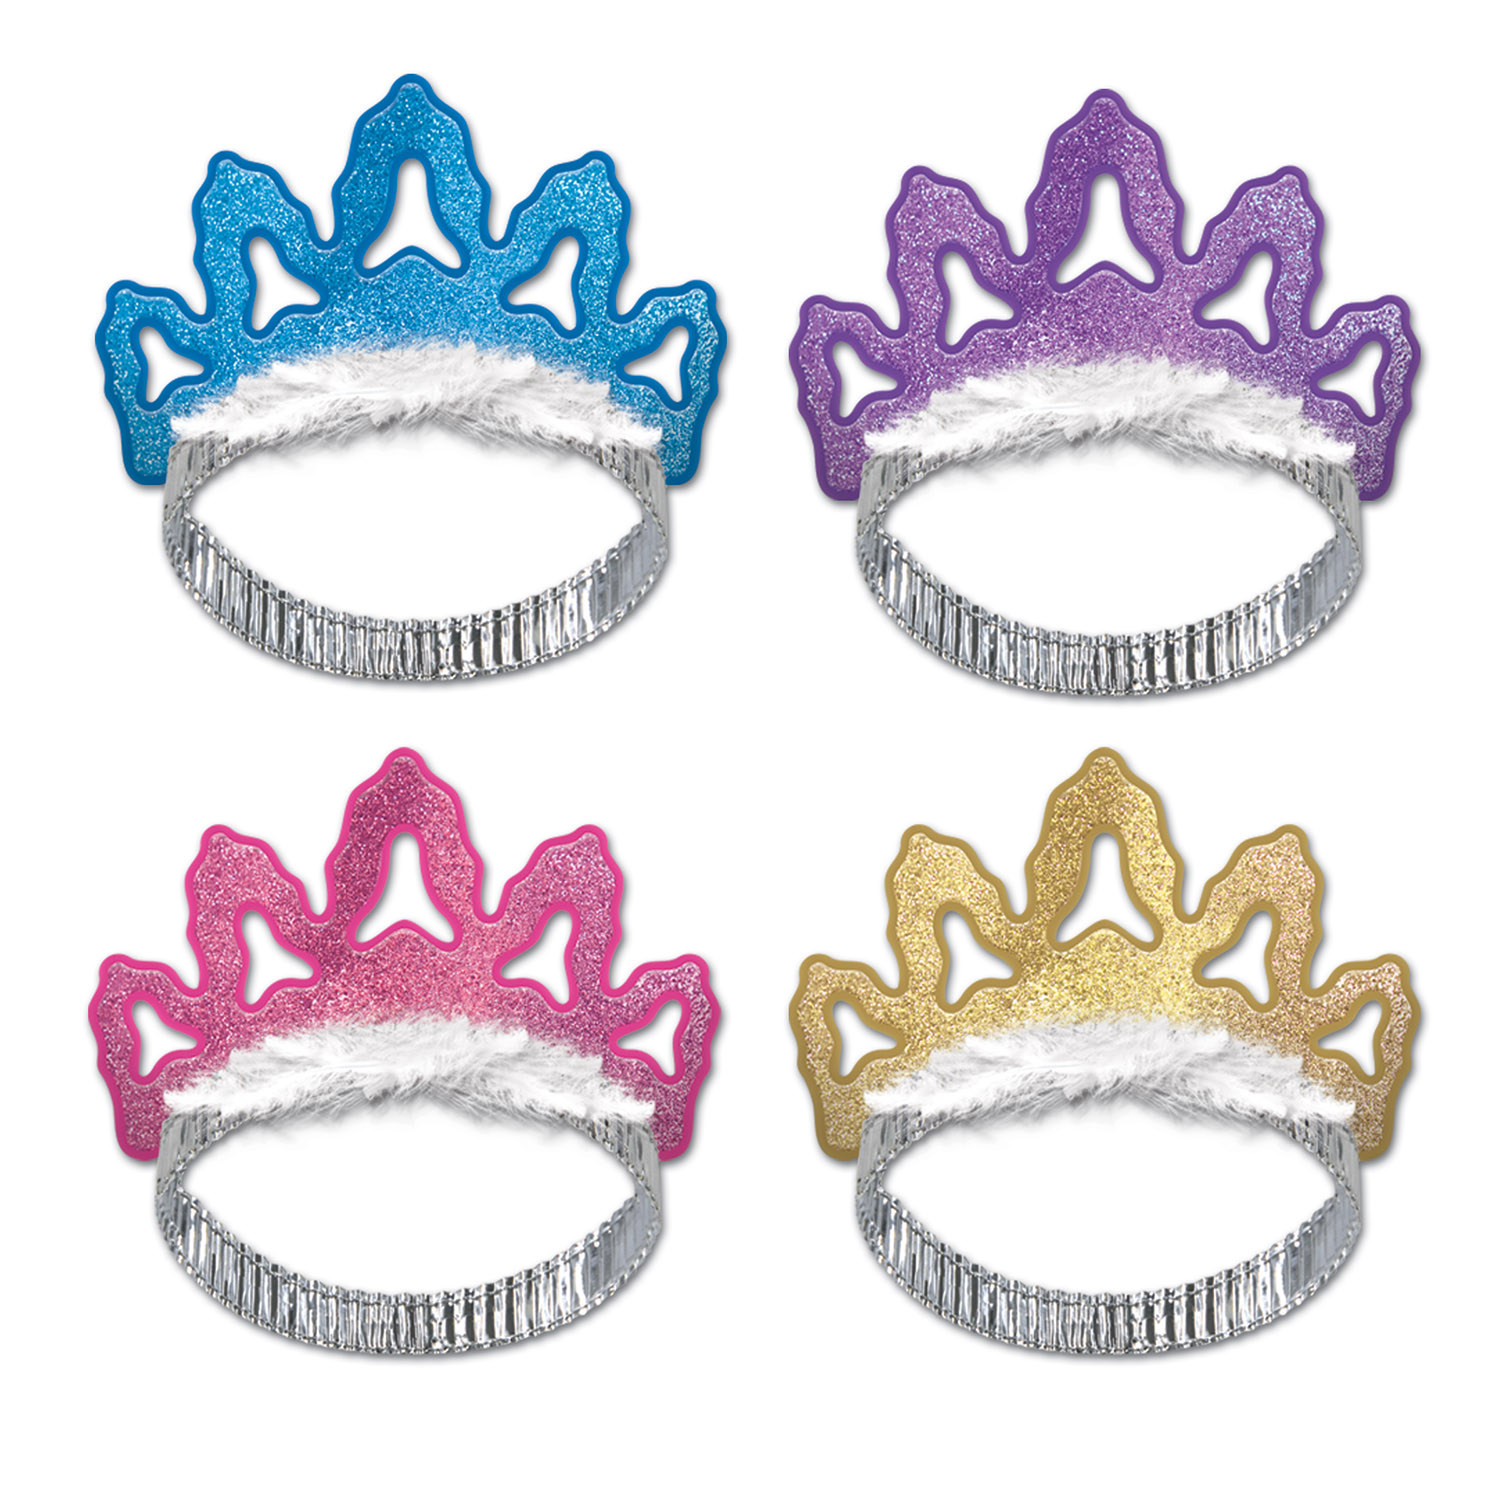 Tiaras in the colors of blue, purple, pink and gold made of card stock material with a layer of glitter.